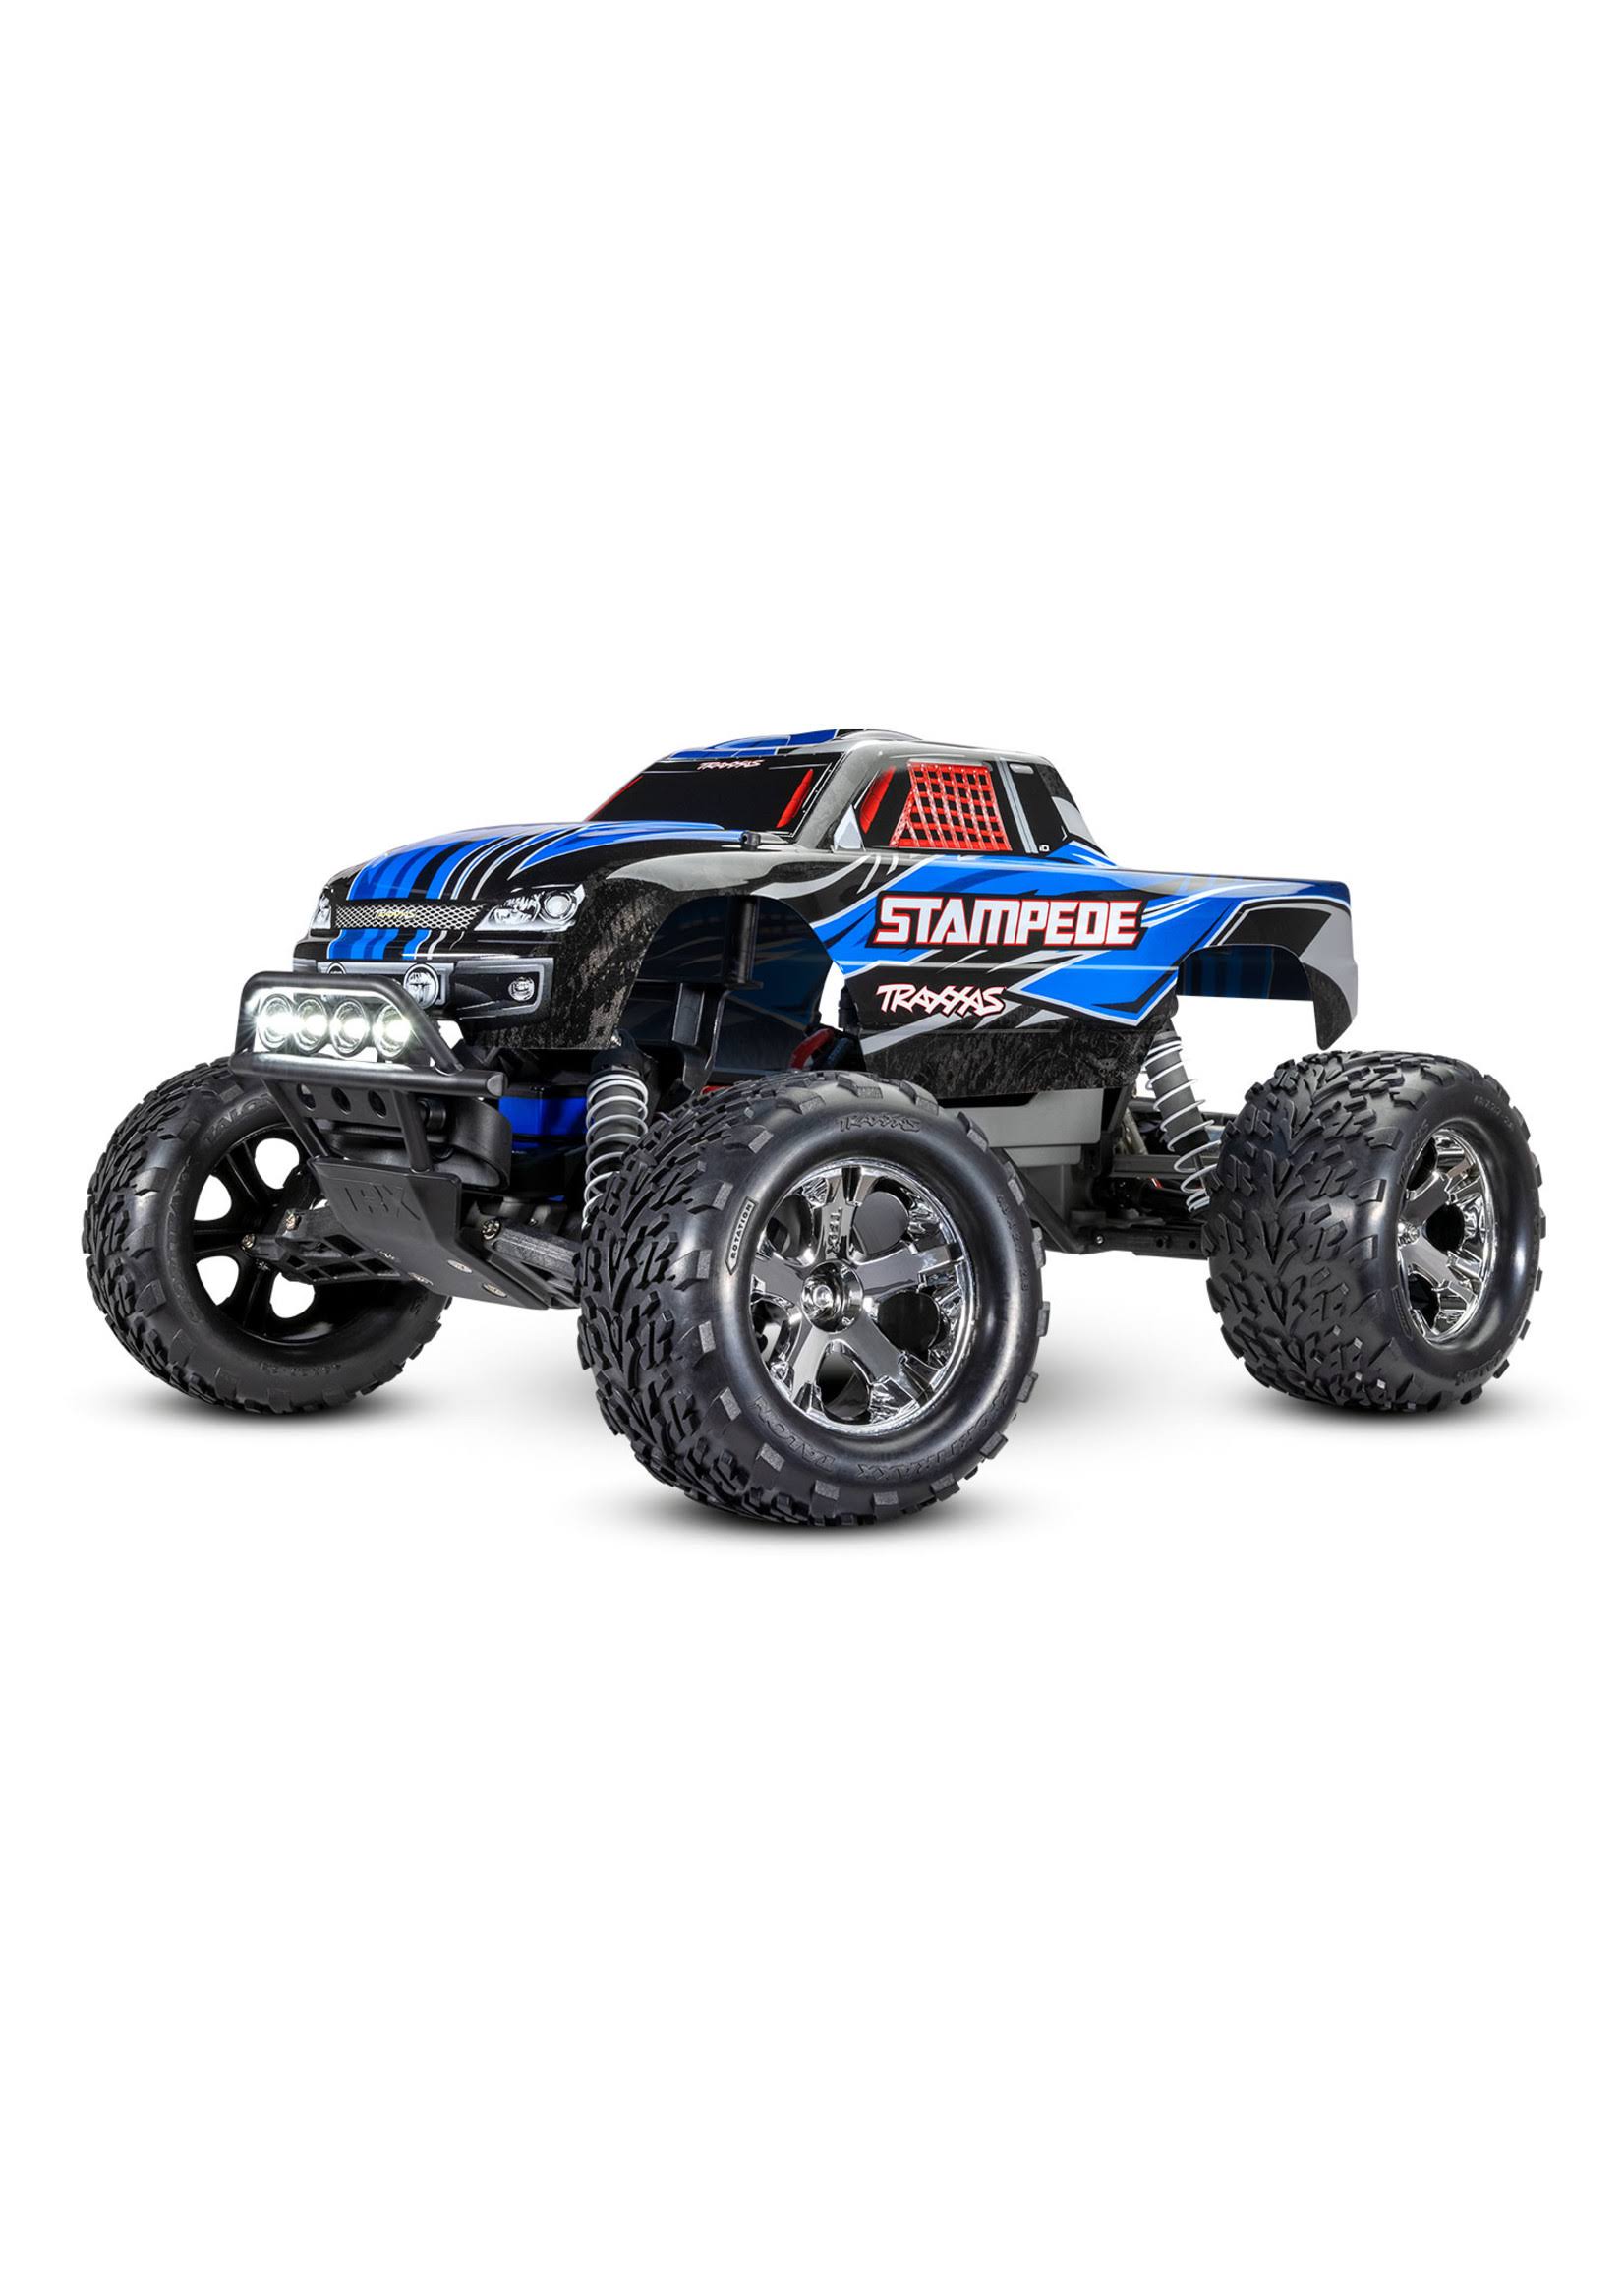 Traxxas Stampede 2WD 1/10 Monster Truck RTR TQ - LED (Blue)